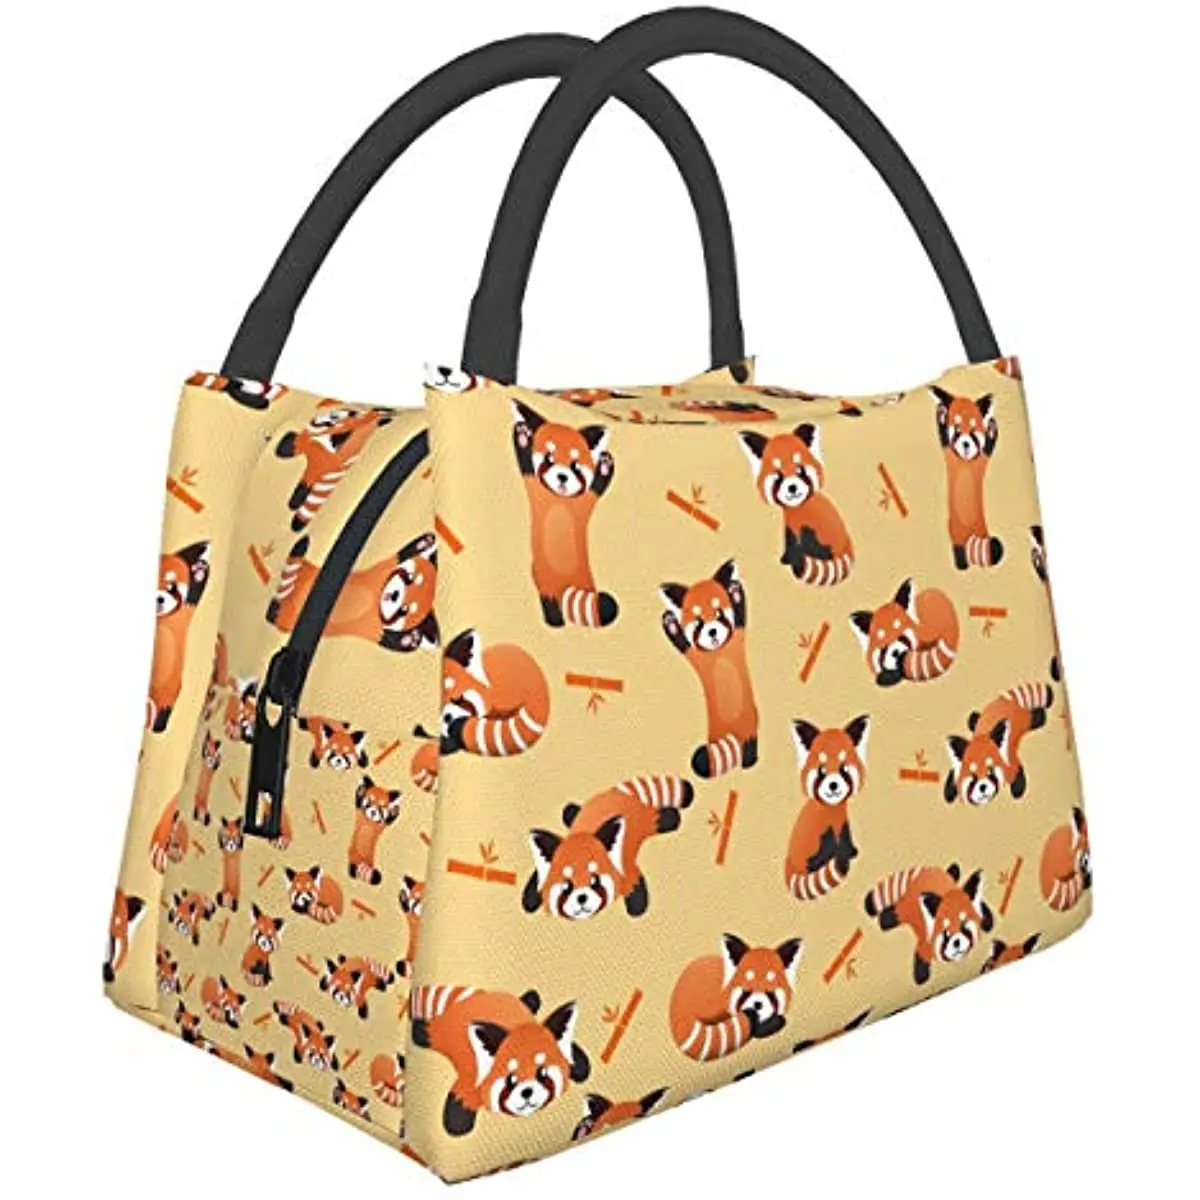 Red Panda Lunch Bag Insulated Lunch Box Meal Prep Cooler Tote for Picnic Camping Work Travel Lunch Box for Women Kids